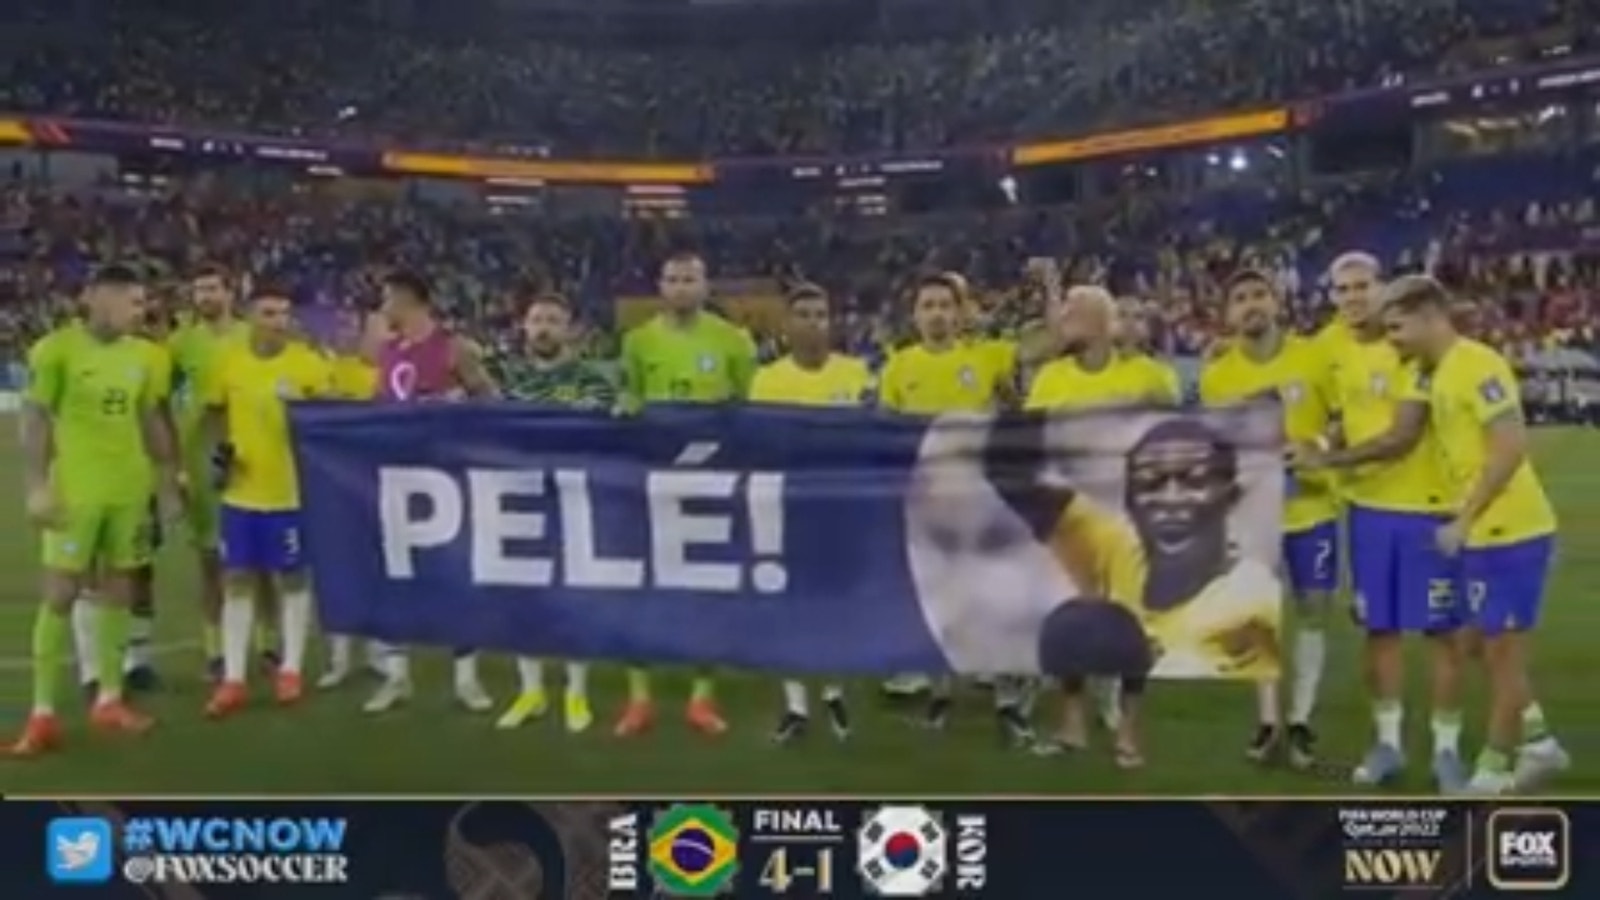 Brazil honors Pelé on field after 4-1 win over South Korea in the 2022 FIFA World Cup